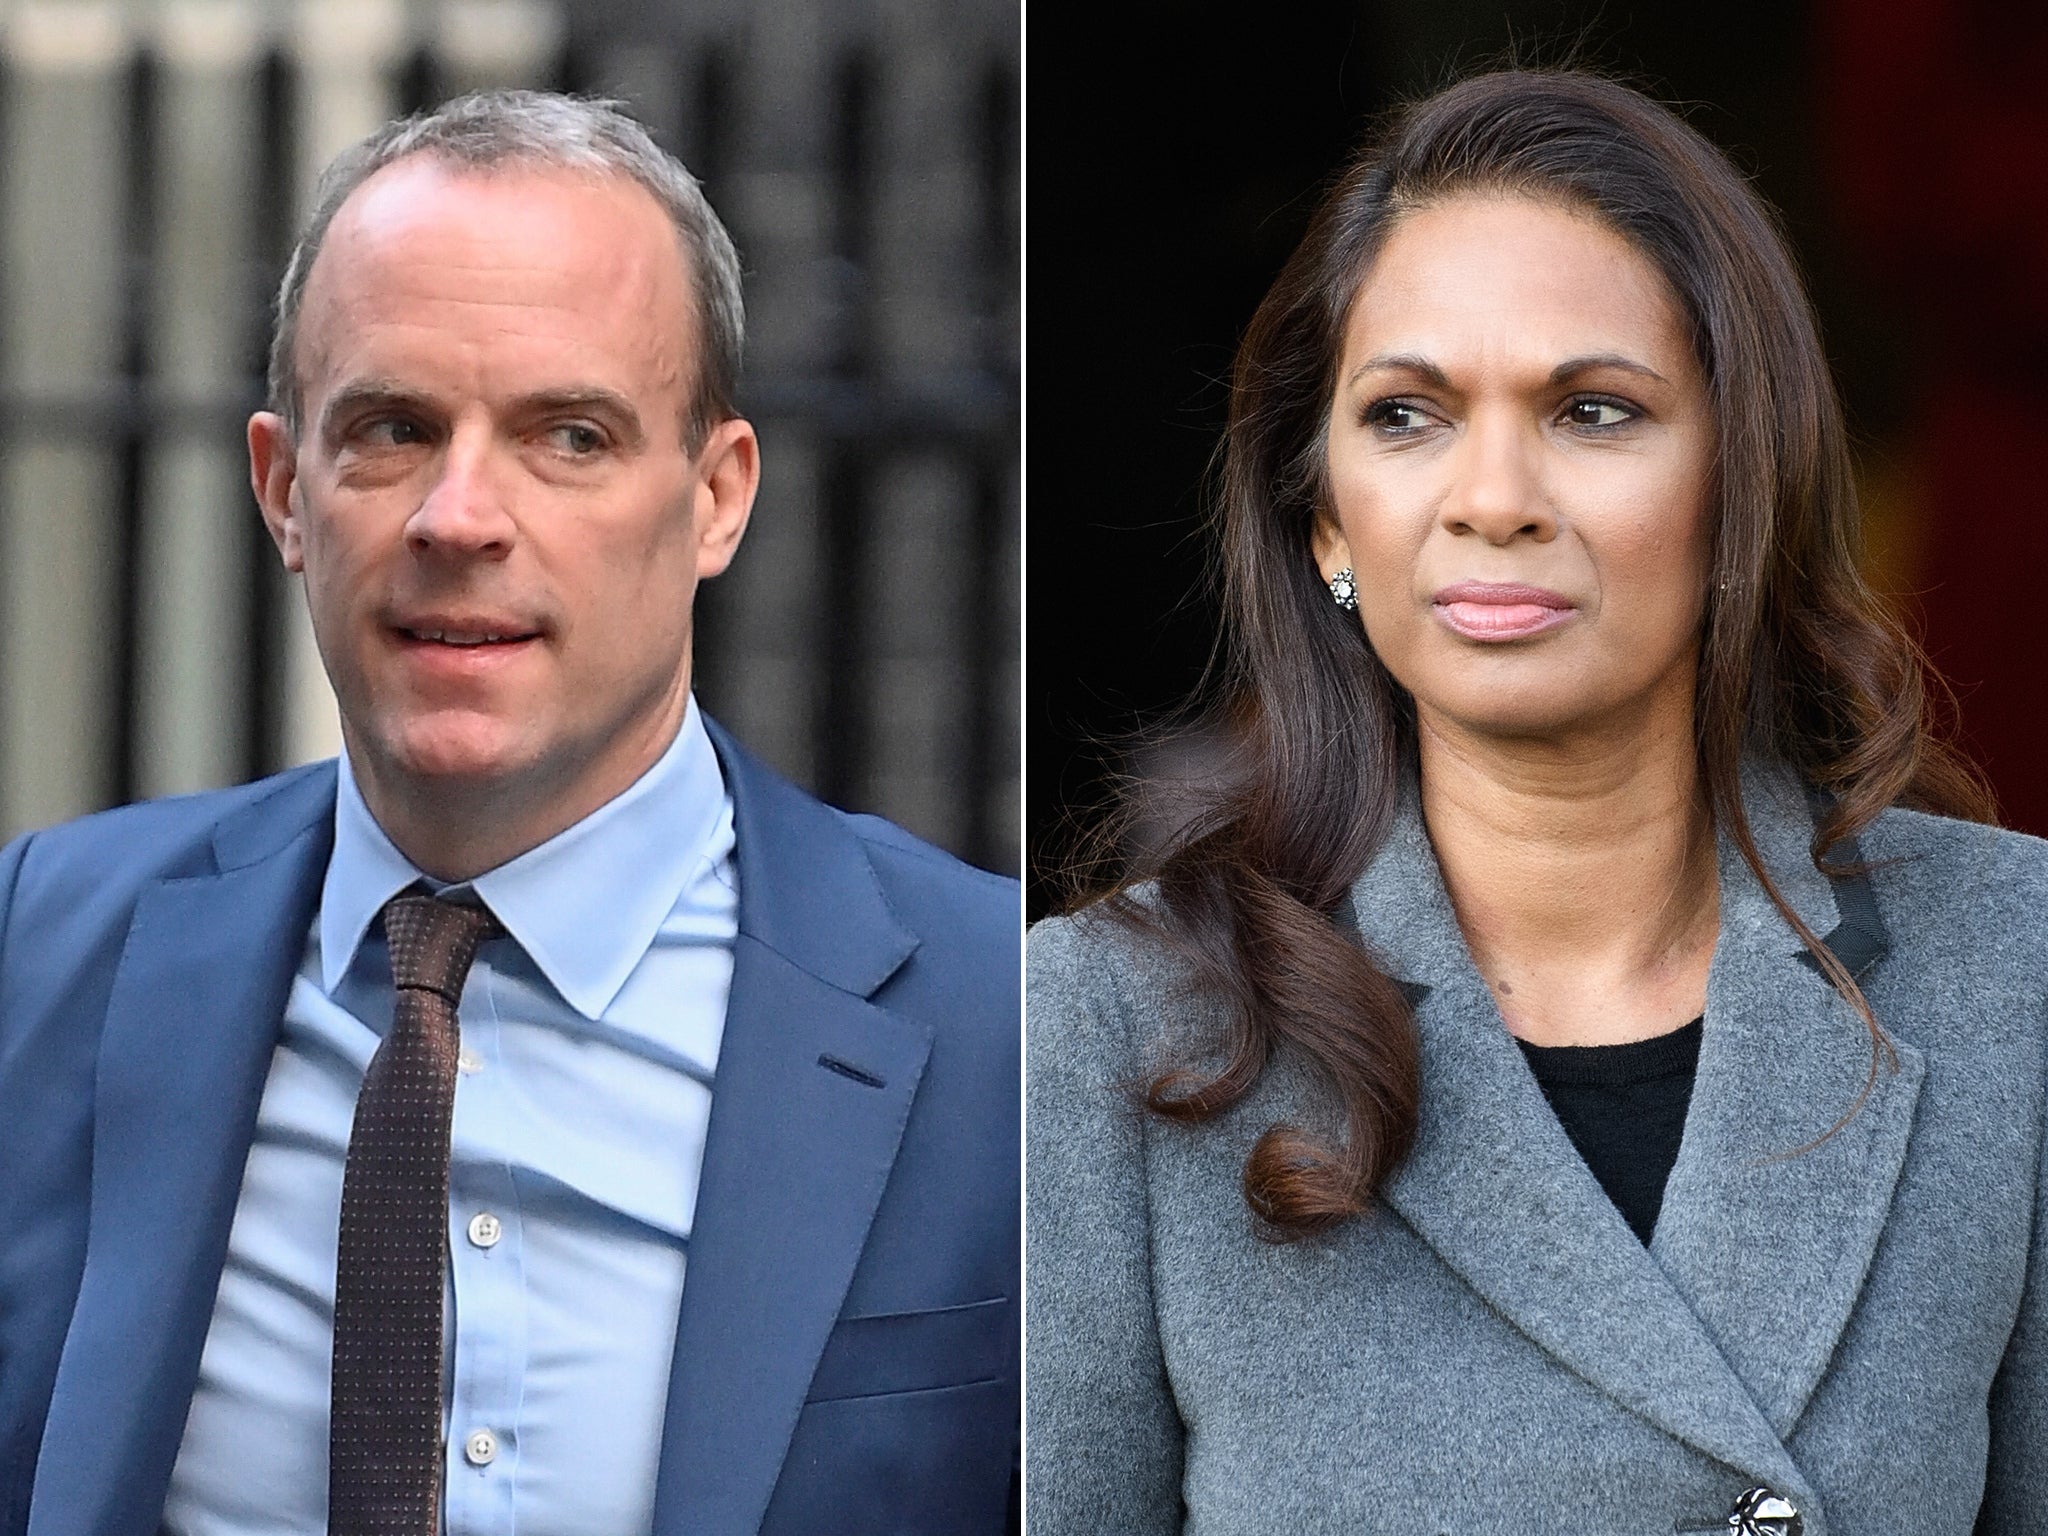 Gina Miller has alleged that Mr Raab bullied her after they took part in a BBC radio programme in 2016